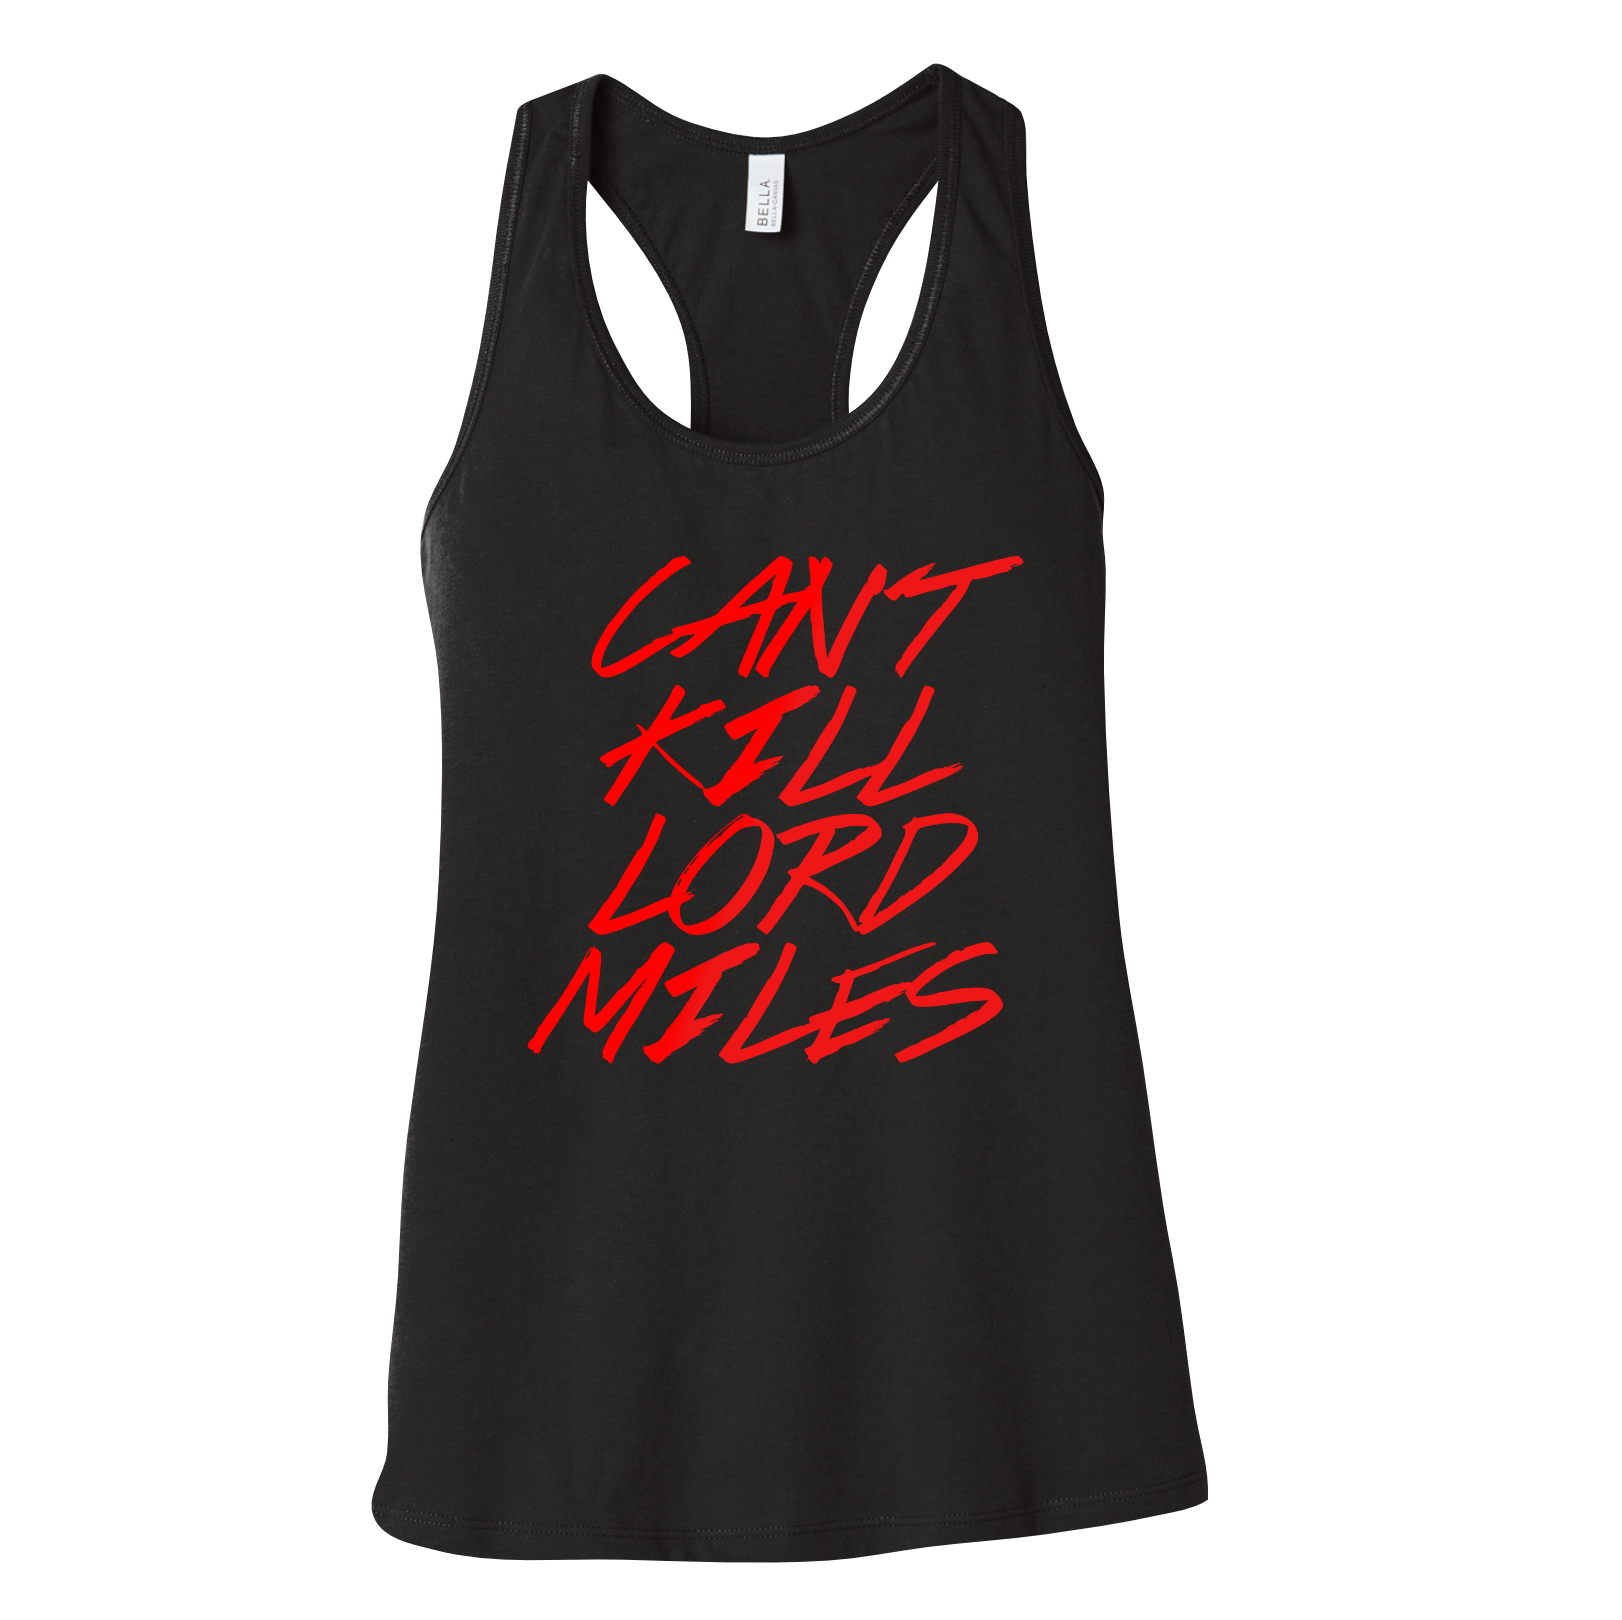 Cant Kill Lord Miles (Red) Tanktop-5